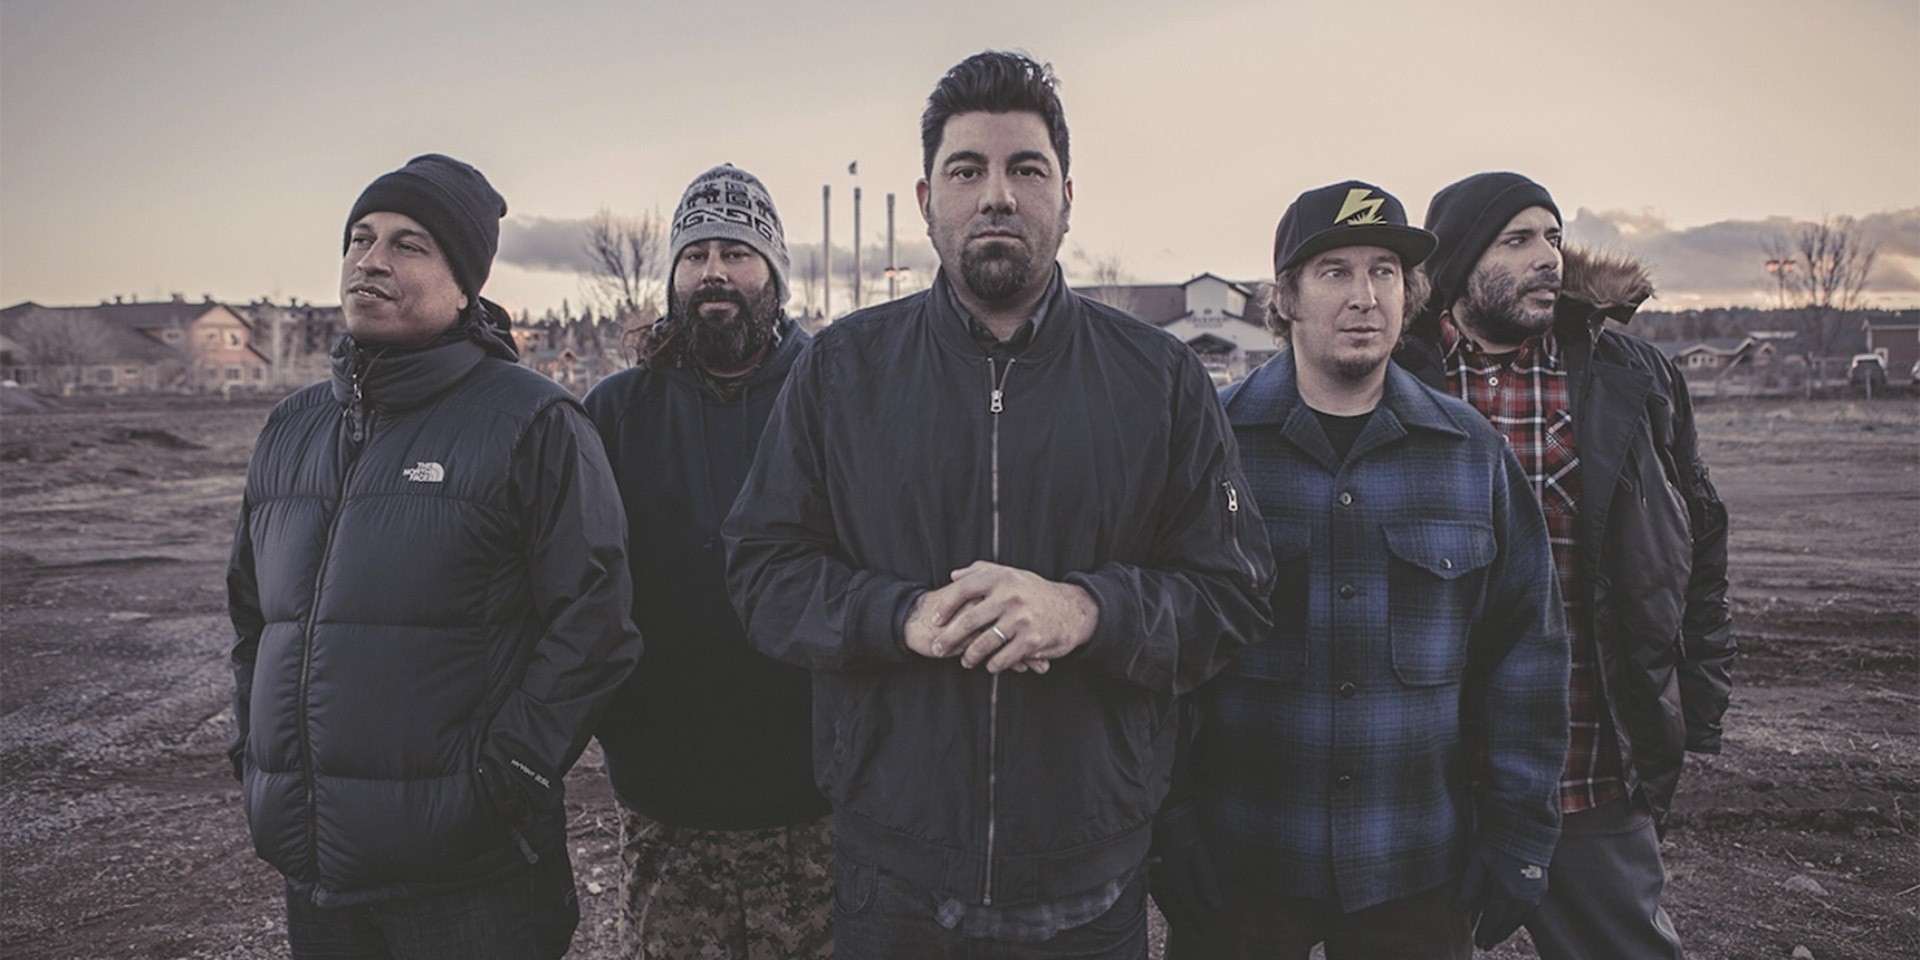 Hold On To Your Rocket Skates: 5 Essential Deftones Songs